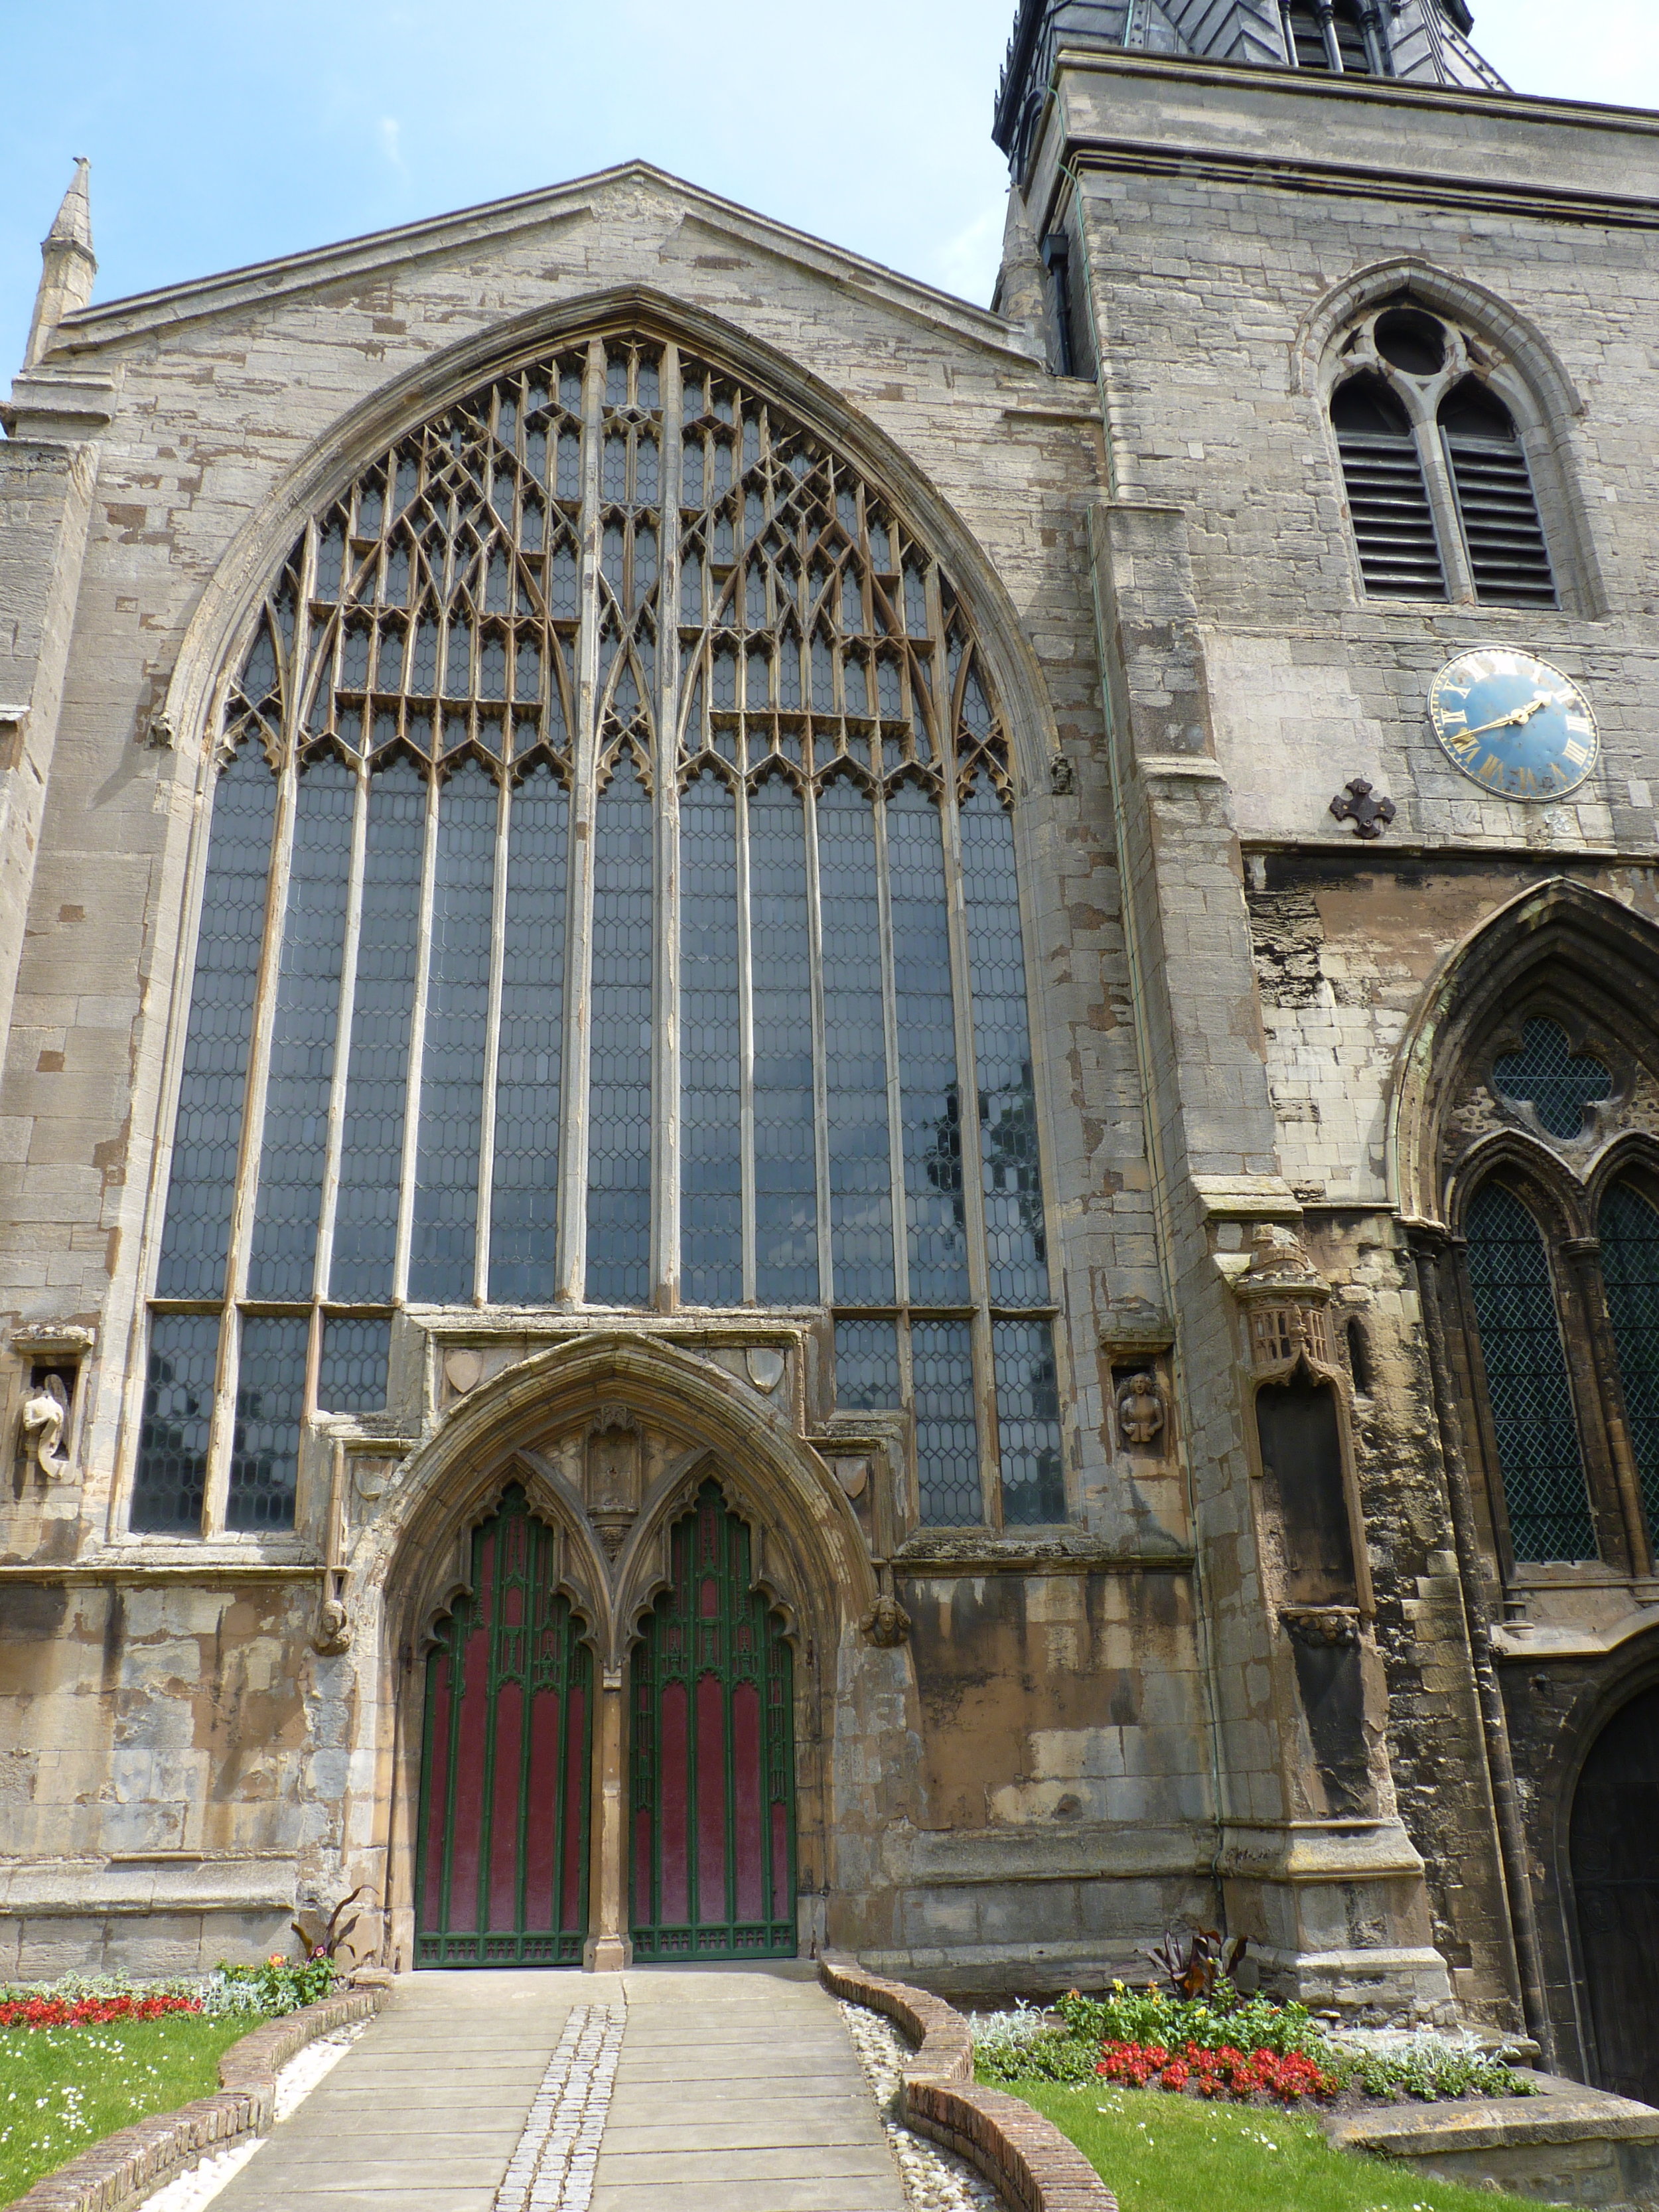  The facade of St Nicholas with its magnificent west window tracery 